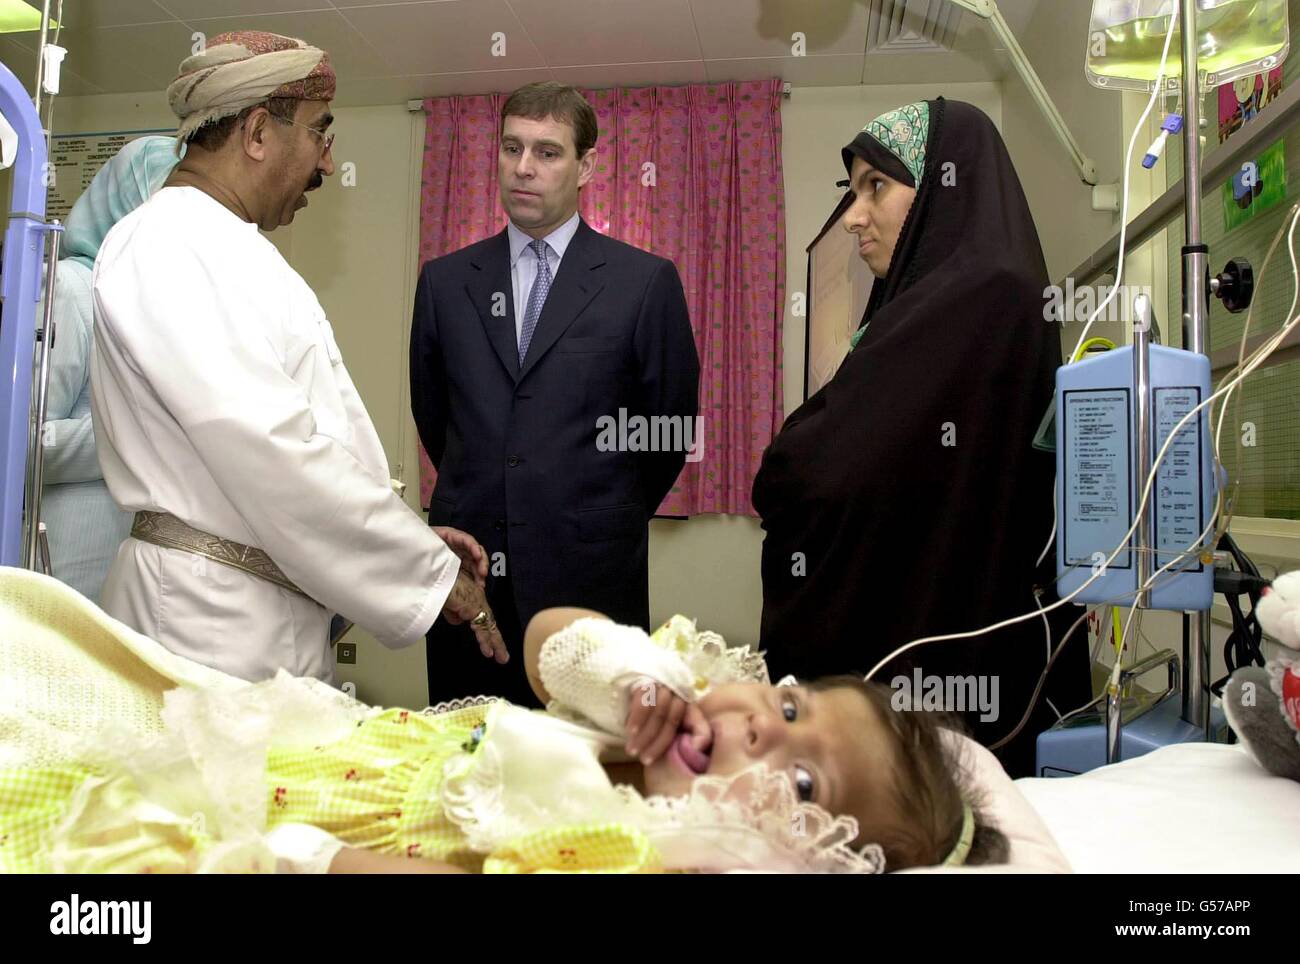 The Duke of York talks to the Doctor treating Mu'mina Khamis Saif, aged 16 months who is suffering from kidney failure, while her mother Fatma Hamad (R) looks on at the Sultan Qaboos University Hospital, just outside the capital Muscat, in Oman. * The Duke is on a three day visit to the middle eastern country for the sultan's 30th Anniversary. Stock Photo